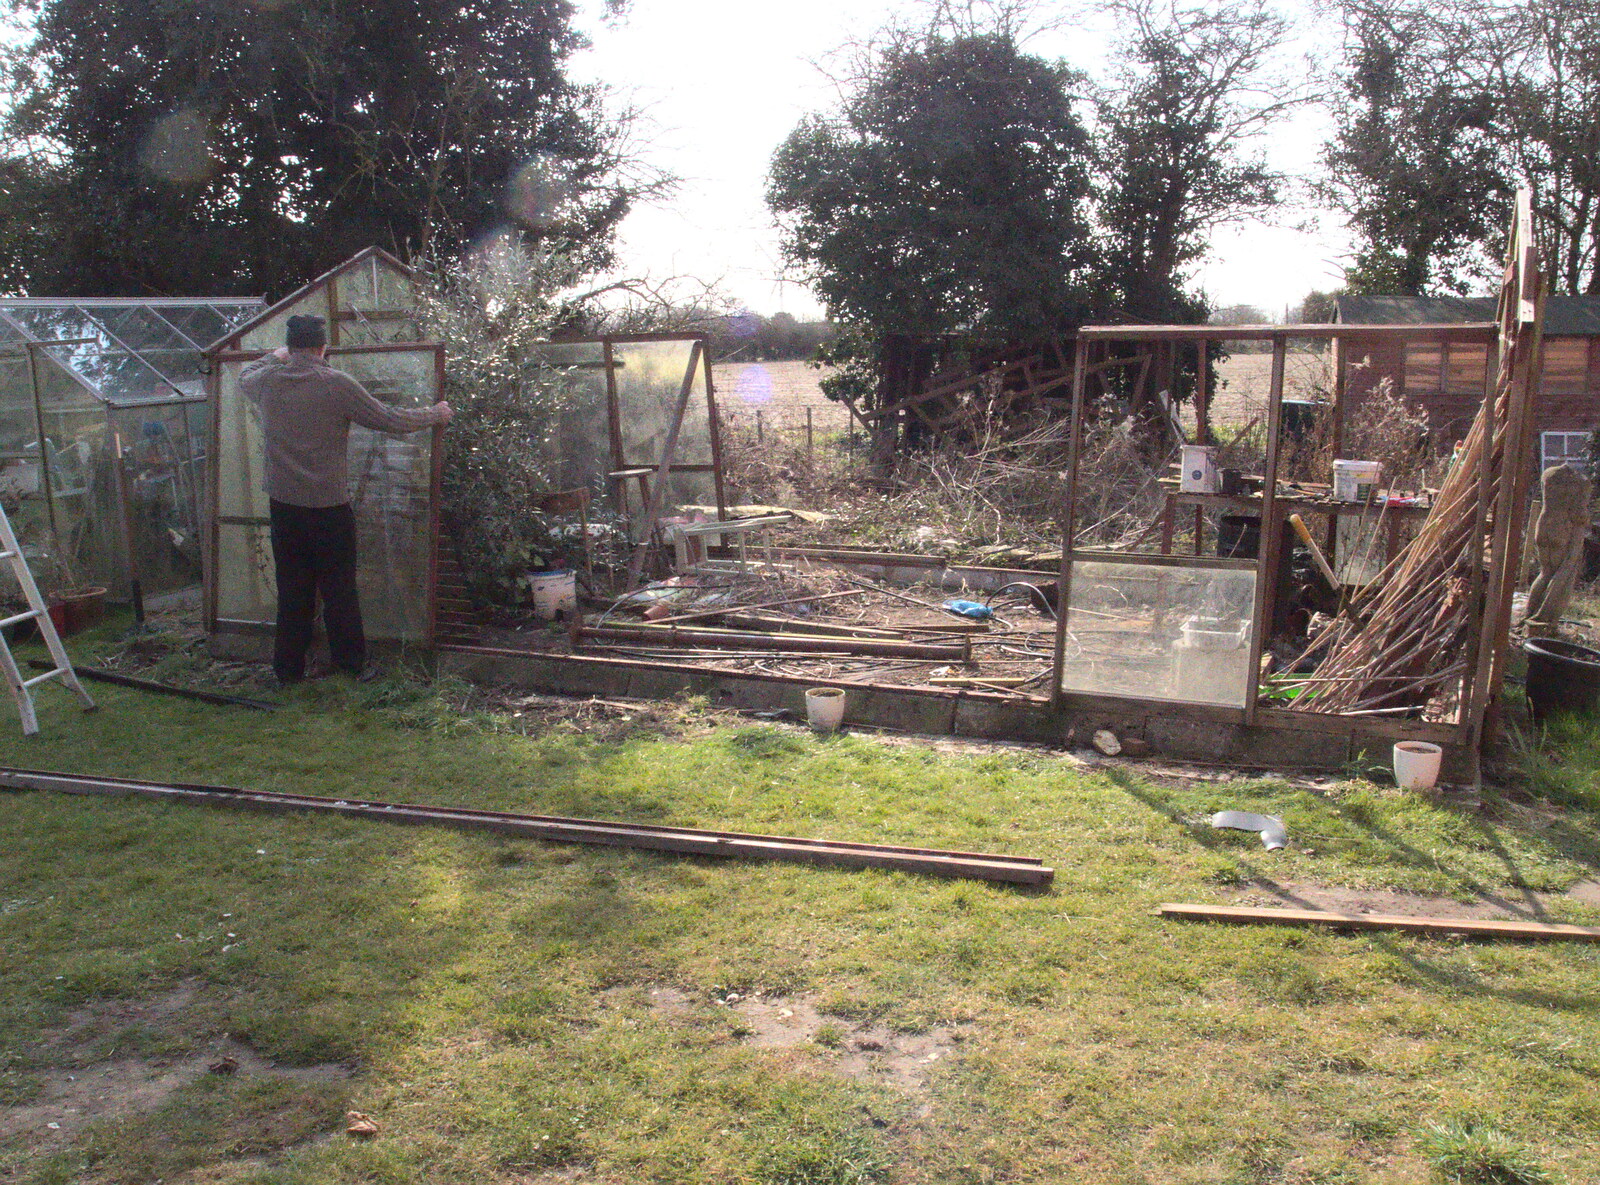 The greenhouse disappears from A Crashed Car and Greenhouse Demolition, Brome, Suffolk - 20th March 2015